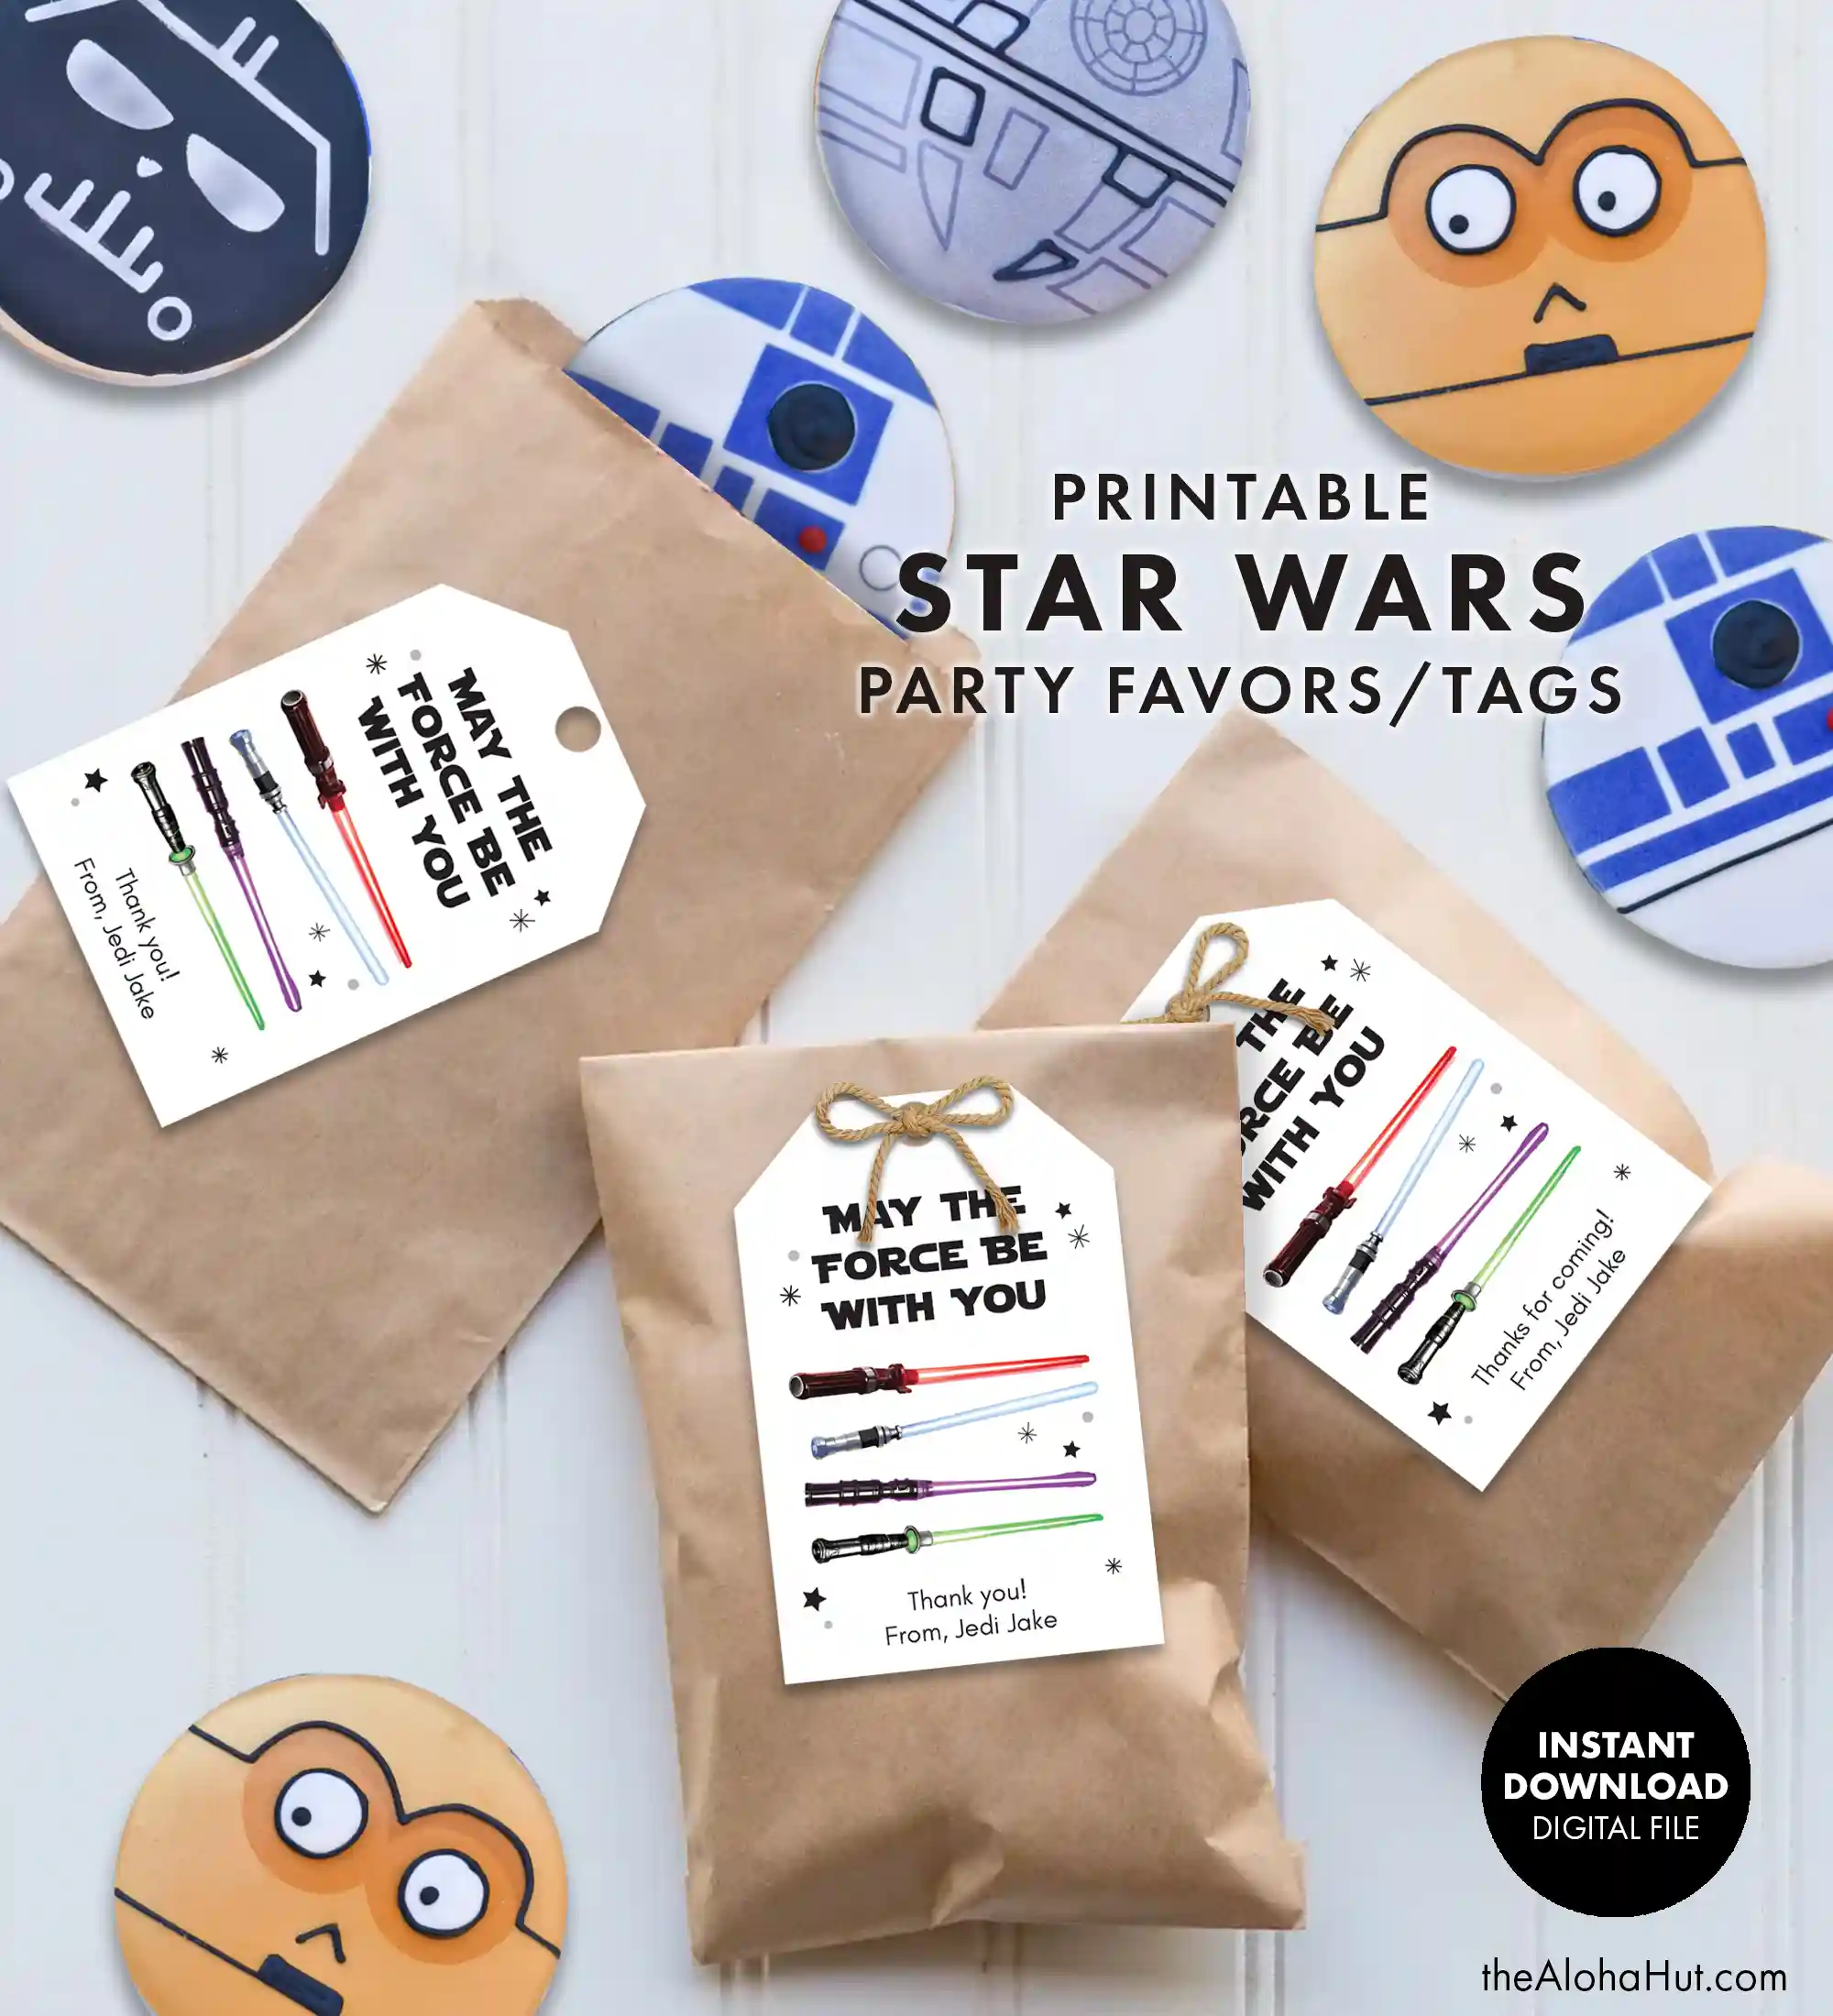 Star Wars party ideas, activities, birthday party games, decorations, and prints. Ideas and tips and tricks for throwing the best Star Wars themed kids birthday party, baby shower, or one with the force celebration. Includes Star Wars printable games, decorations (cupcake toppers, banners, gift tags, characters) and Star Wars party games (BINGO, scavenger hunt, pin the lightsaber on Yoda or Darth Vader). May the Force be with you gift tags.